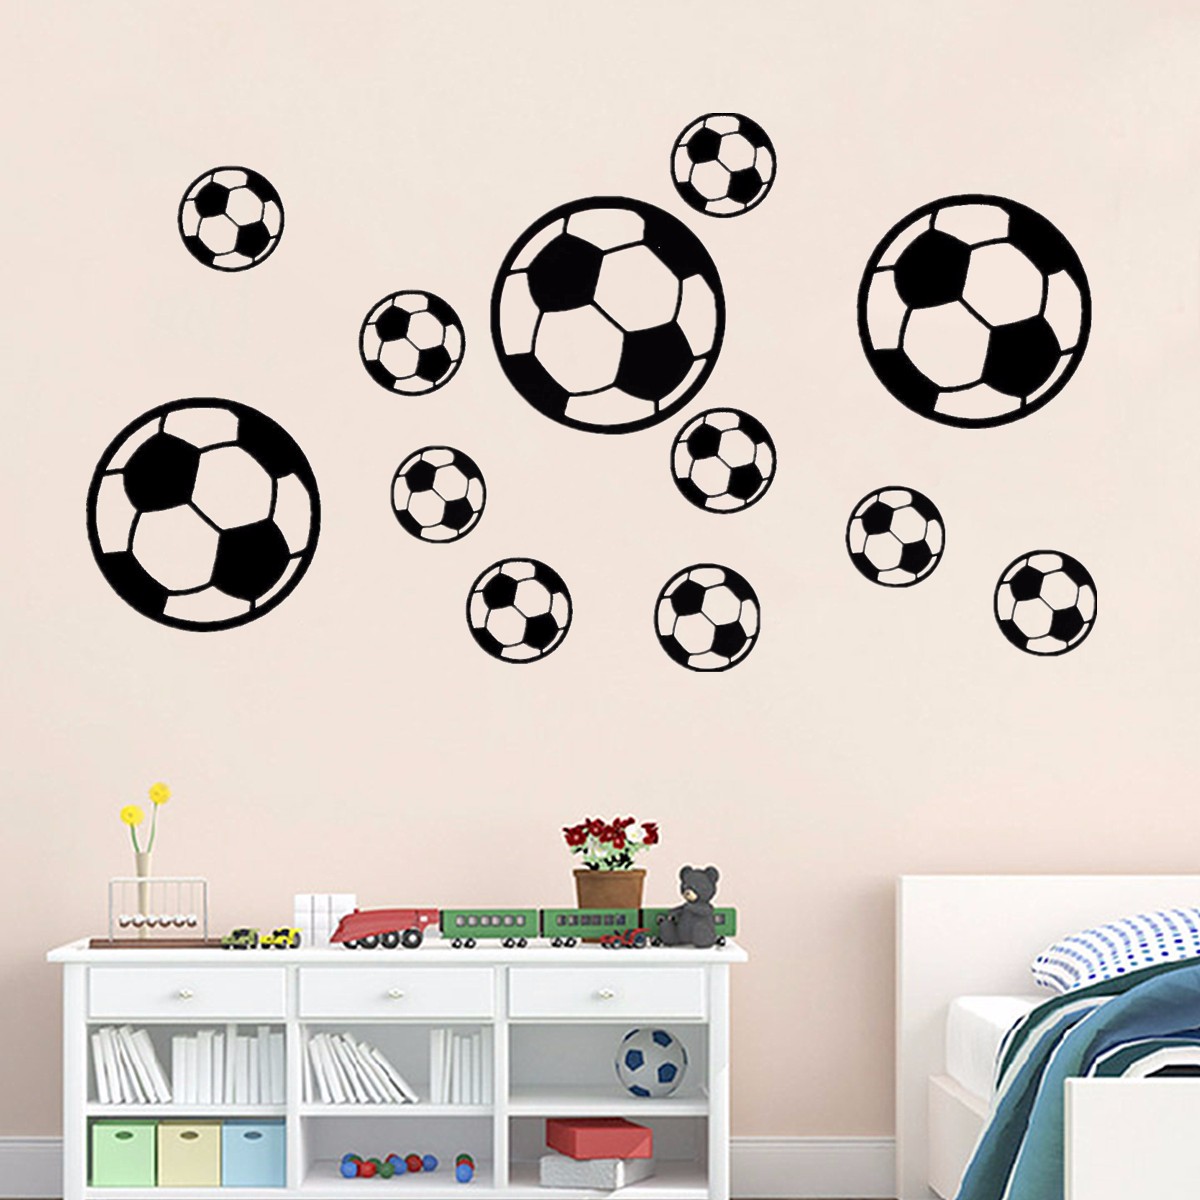 12PcsSet-Football-Soccer-Wall-Stickers-Children-Nursery-Kids-Room-Decals-Gift-Home-Decorations-1470248-7